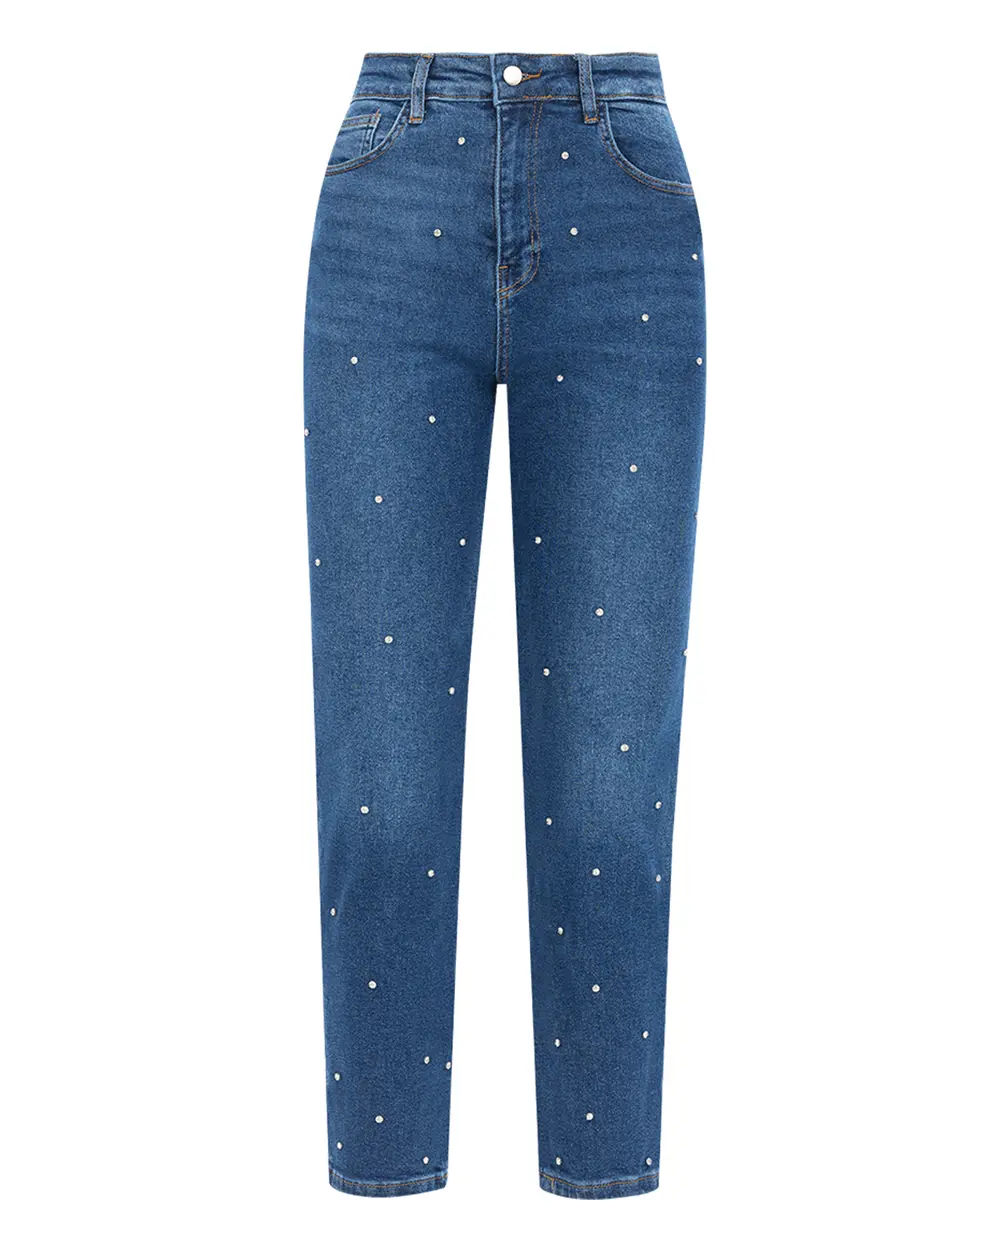 Stone Detailed Ankle Length Skinny Fit Jean Trousers